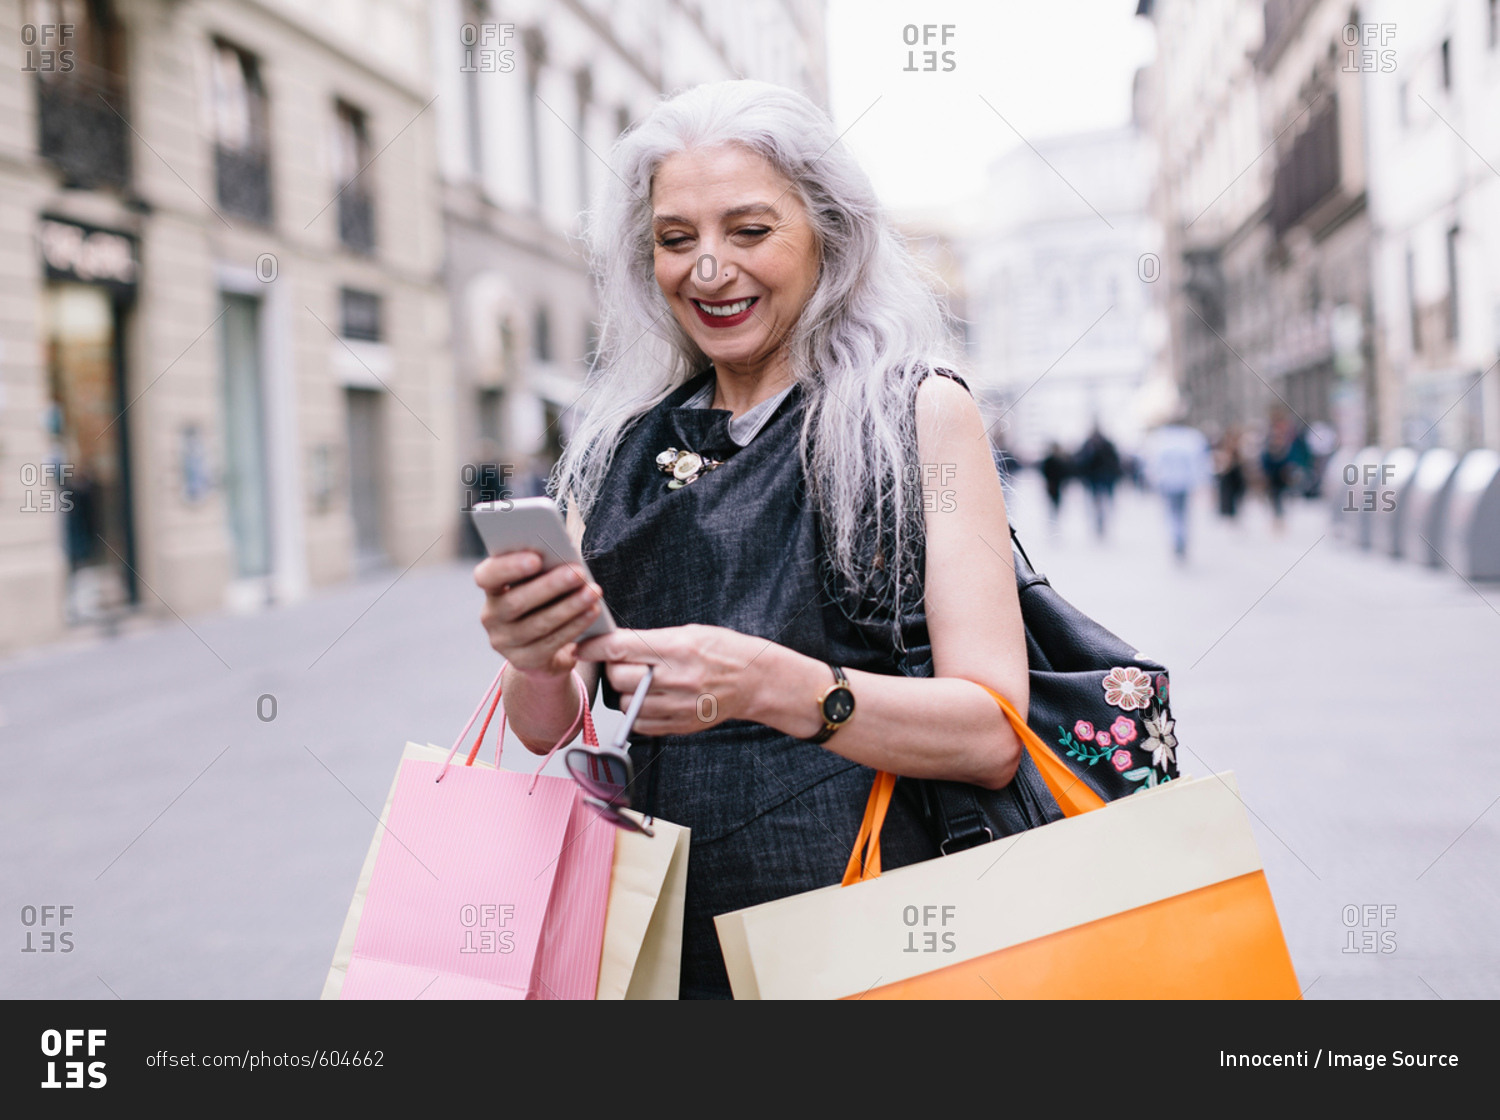 Stylish mature female shopper looking at smartphone on street, Florence, Italy